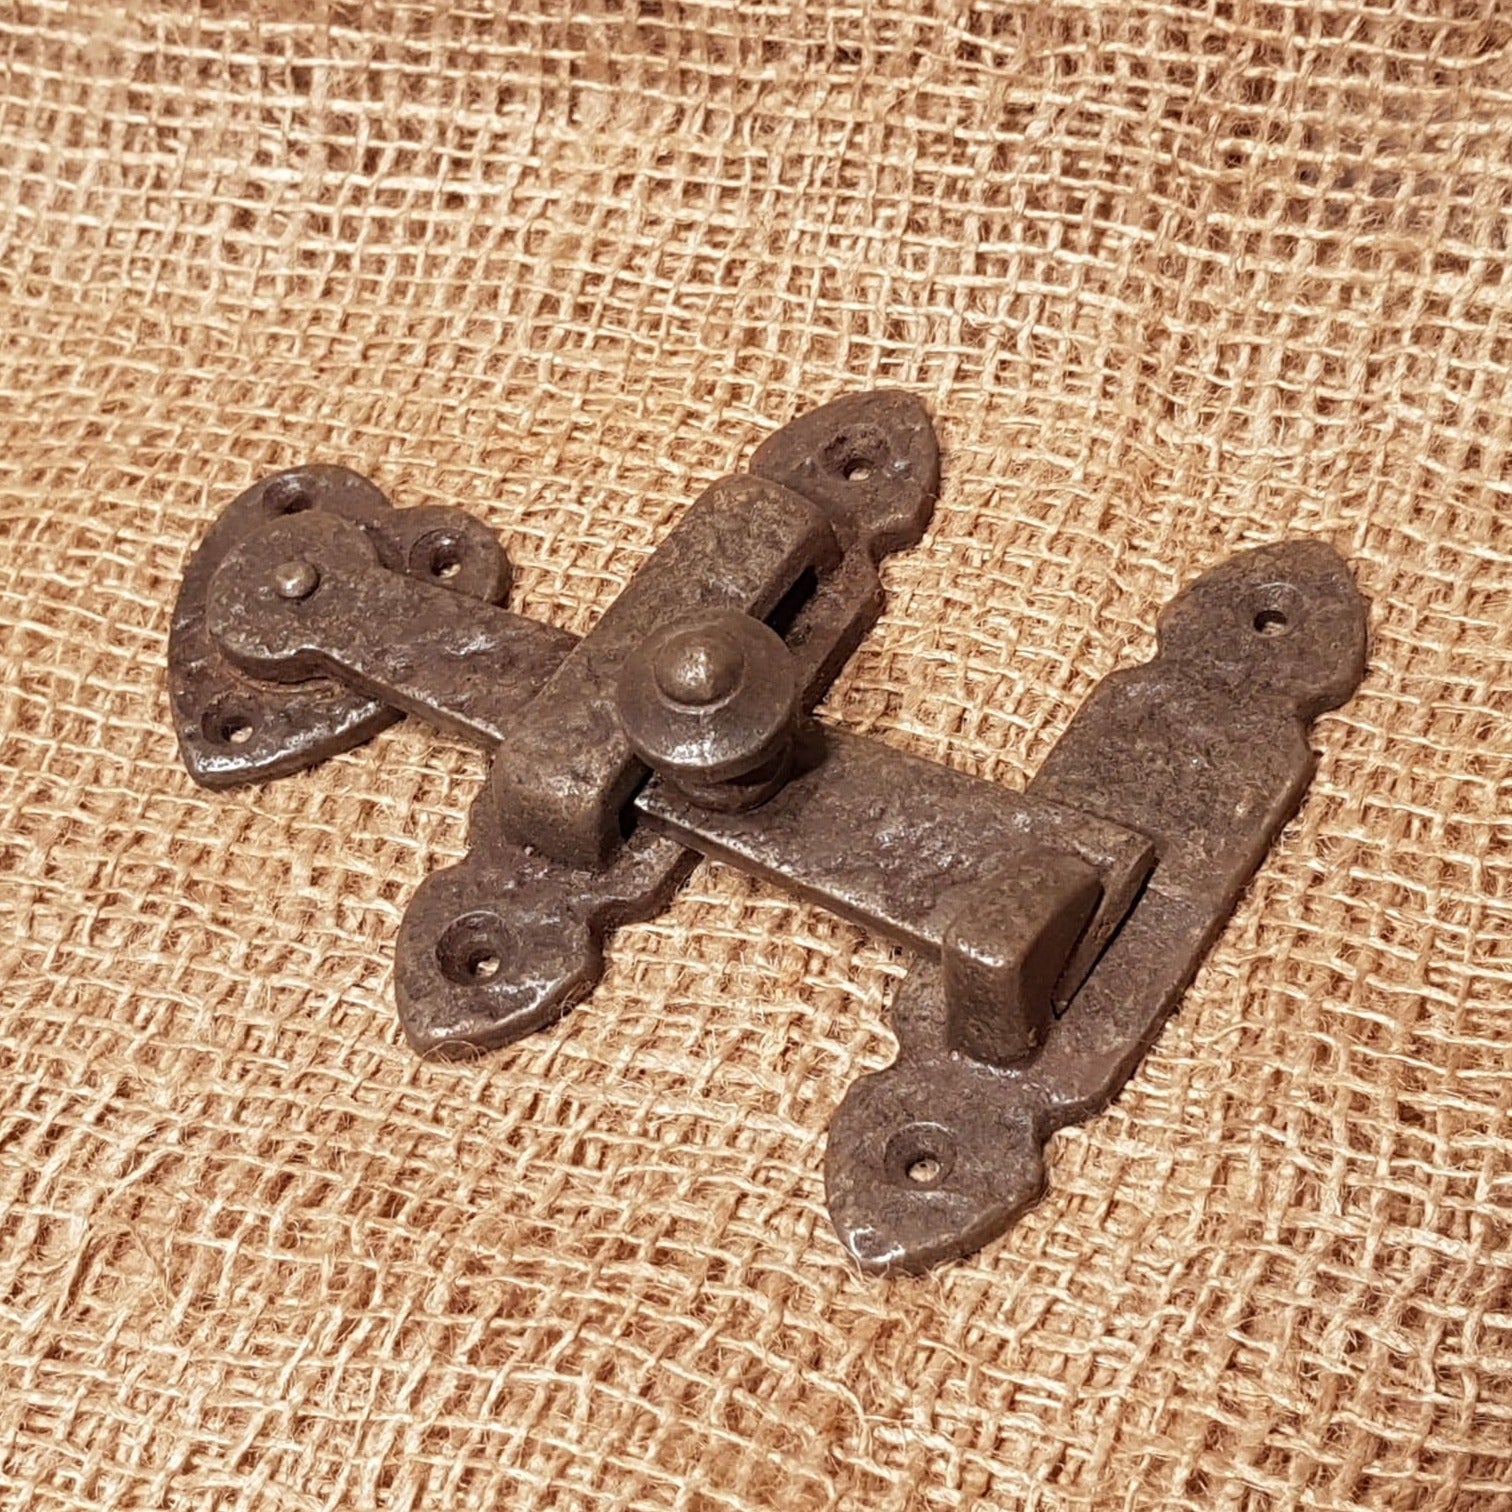 Gate / Door Latch - Riven Cast Iron - Spearhead Collection - Door & Gate Entryway Hardware - Barn Restoration, Country Farmhouse, Entryway Hardware, Exterior Decor, Gate Latches, Hardware, La